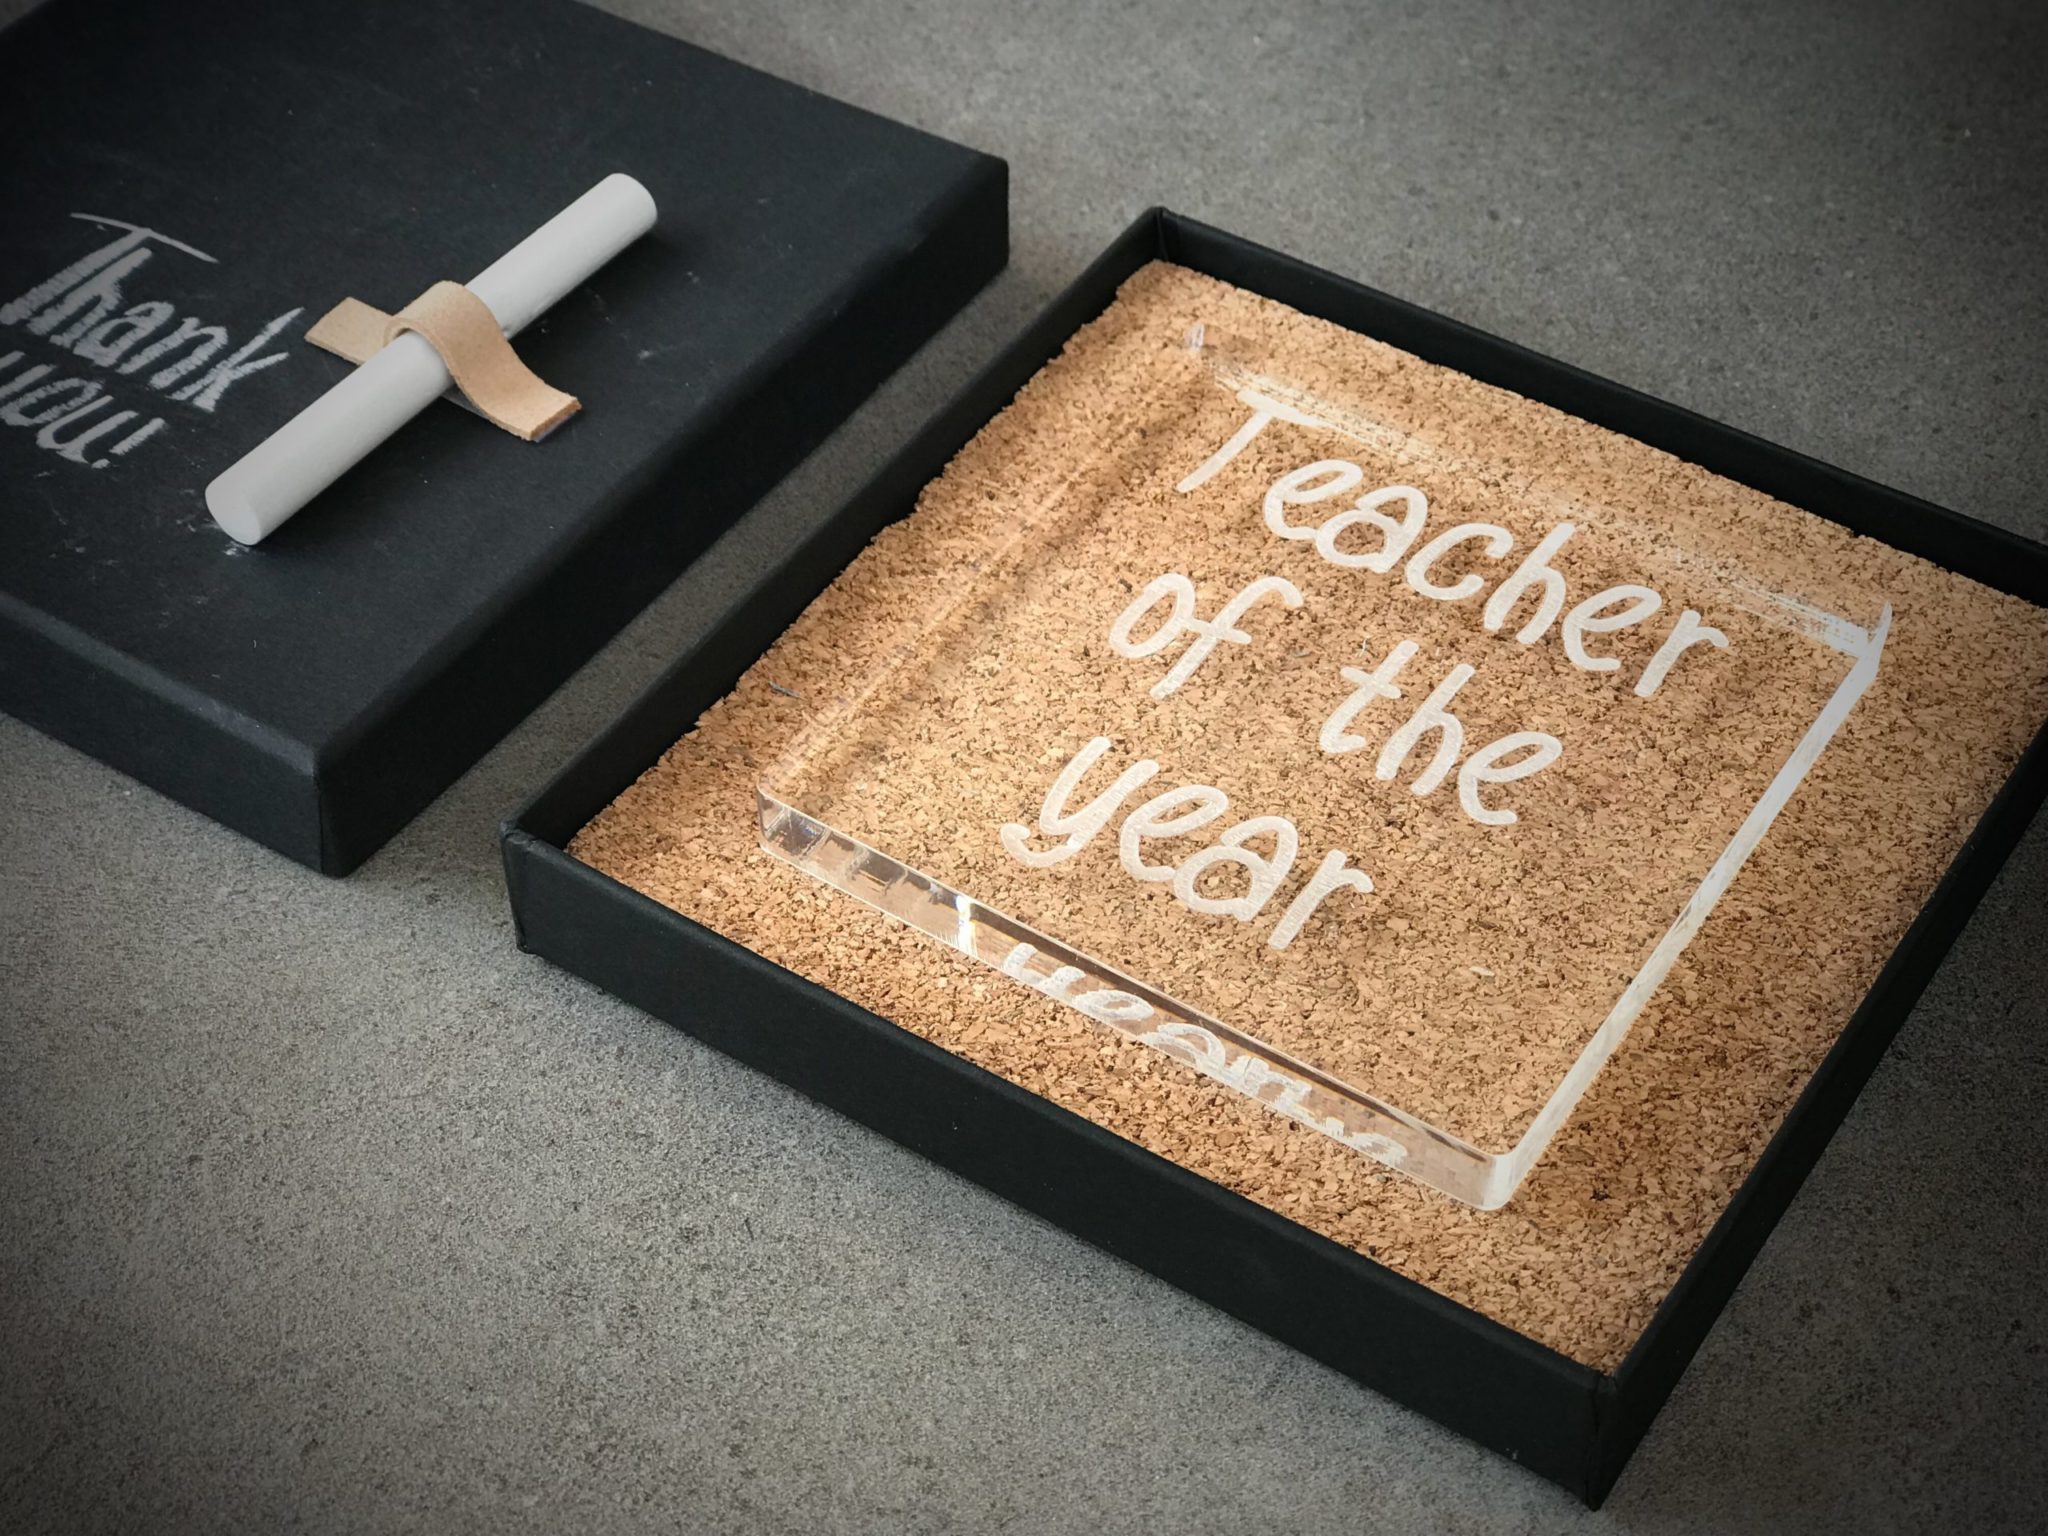 Teacher Of The Year-special occasion-plexi sign-packaging-close up